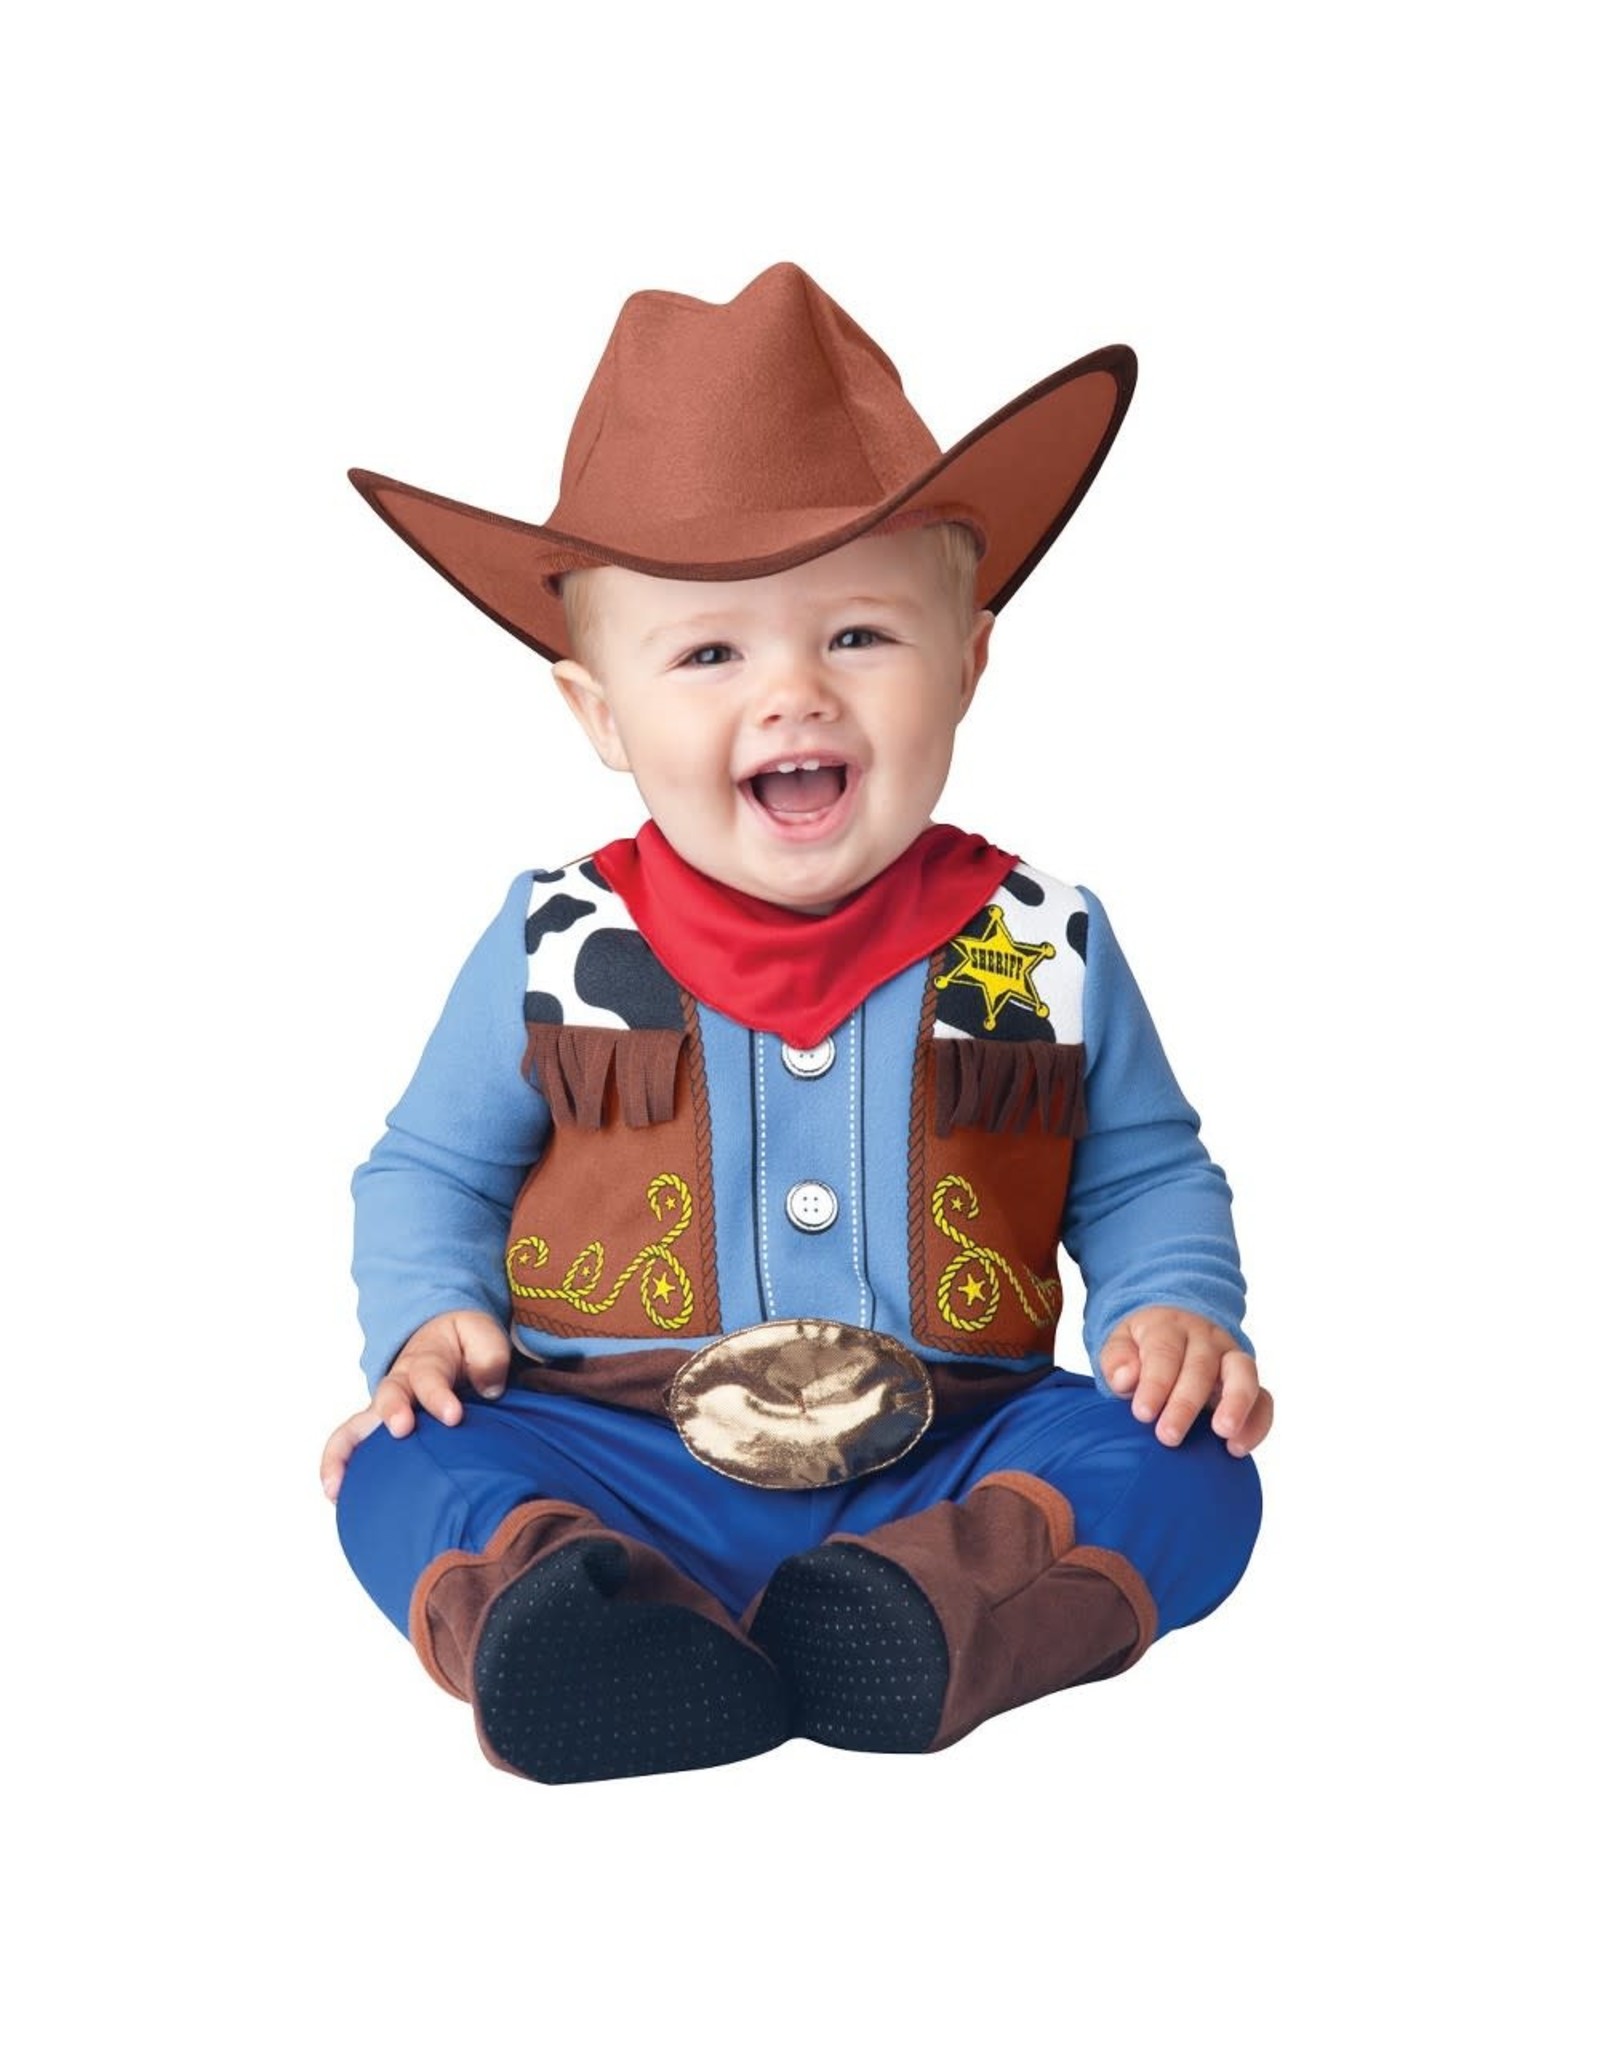 Incharacter Costumes Wee Wrangler, Multi, 12-18 Months (Toddler), 16024